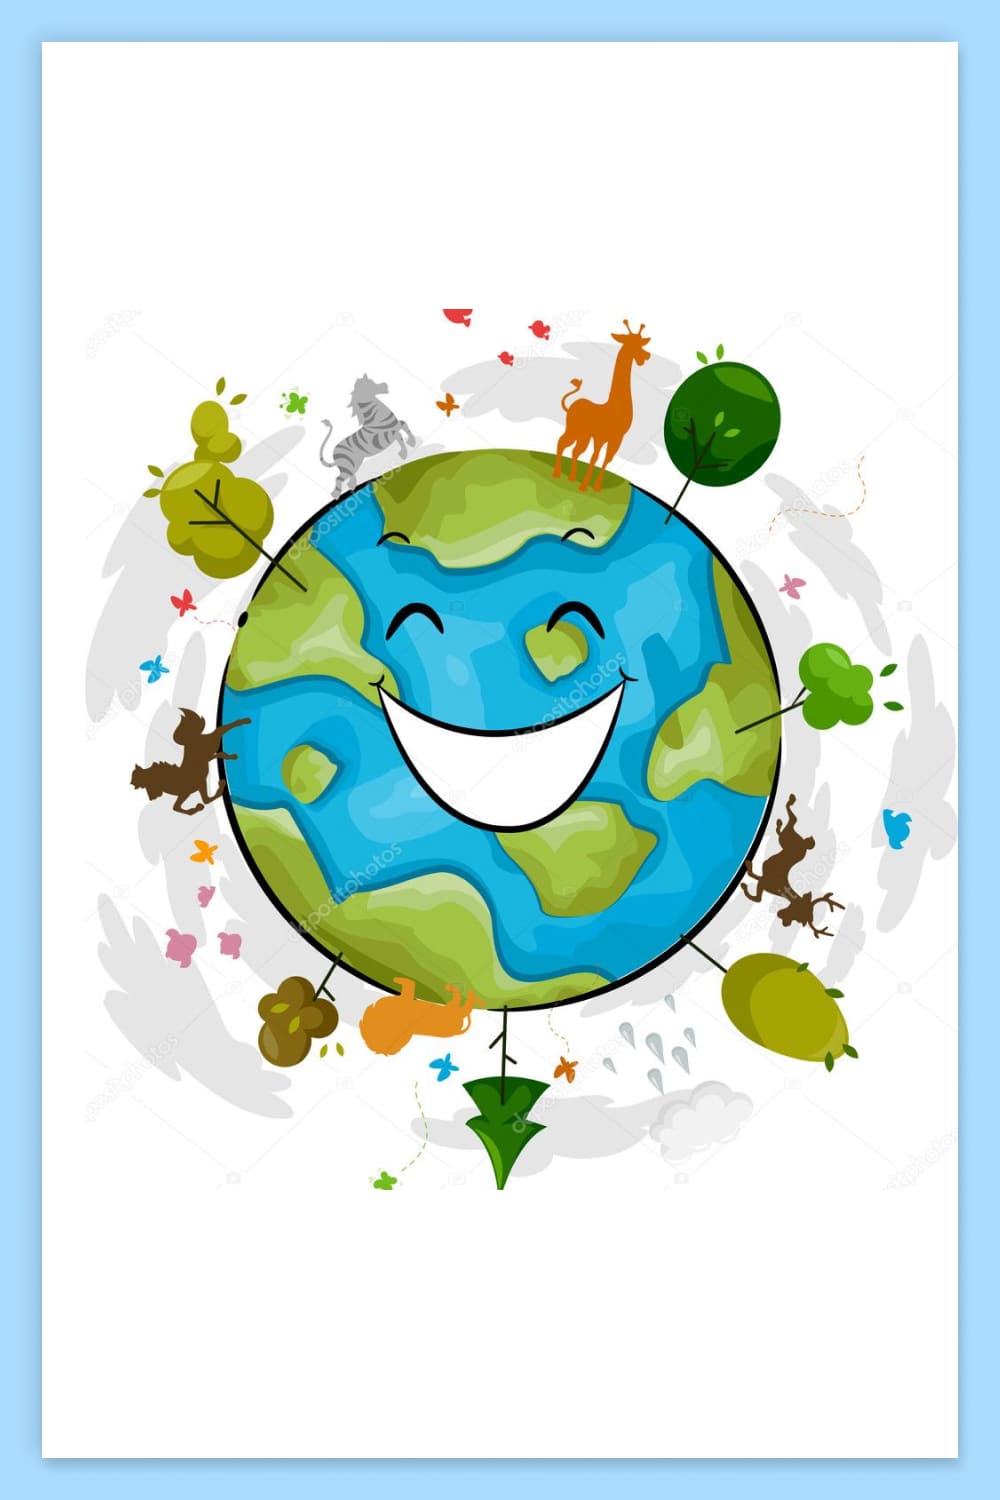 Drawing of a smiling planet Earth with trees and animals on it.